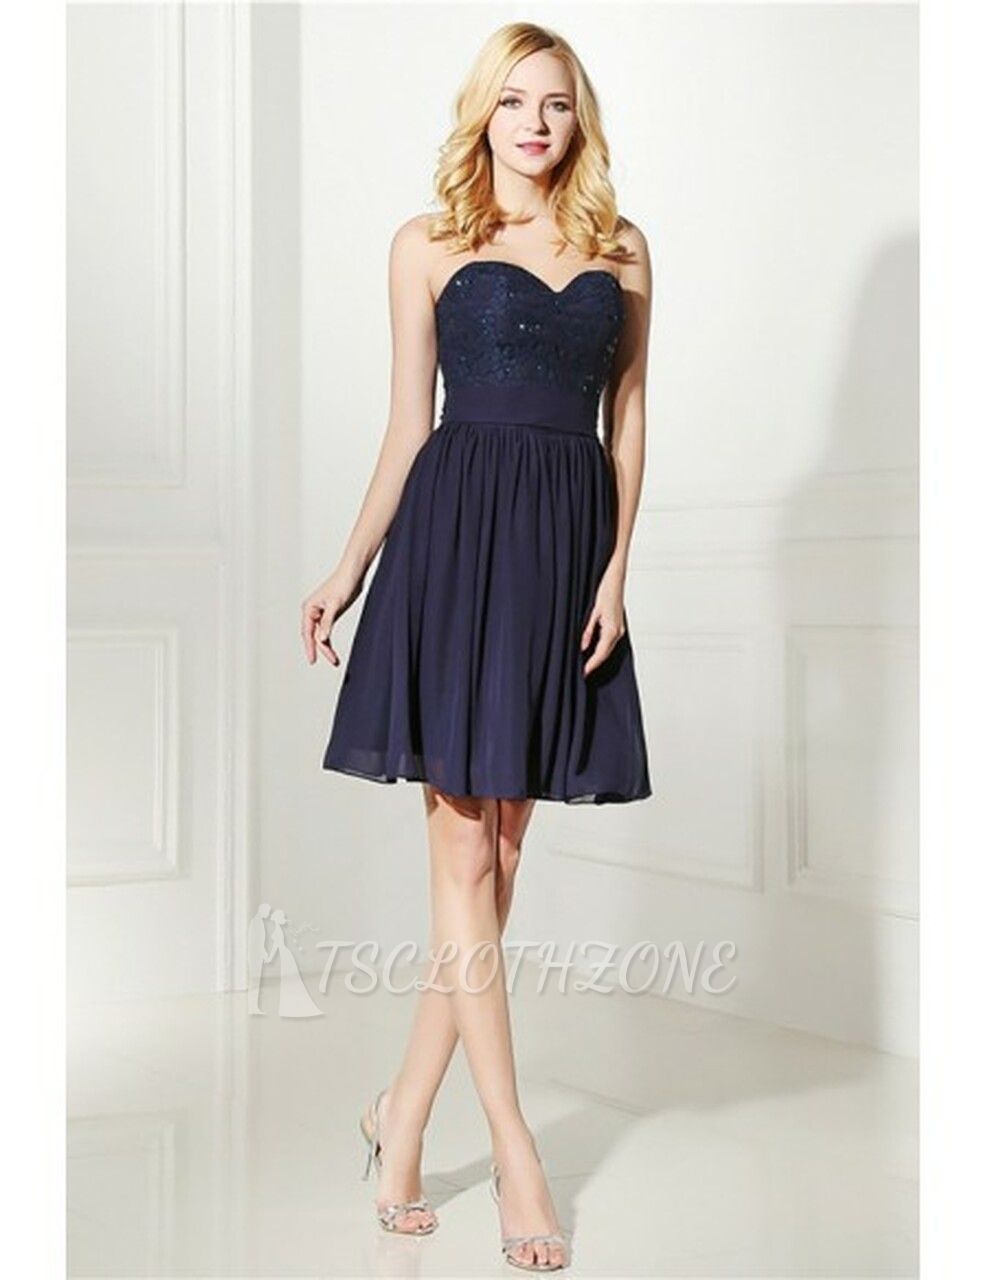 Strapless Navy Blue Lace Top Short Bridesmaid Dress